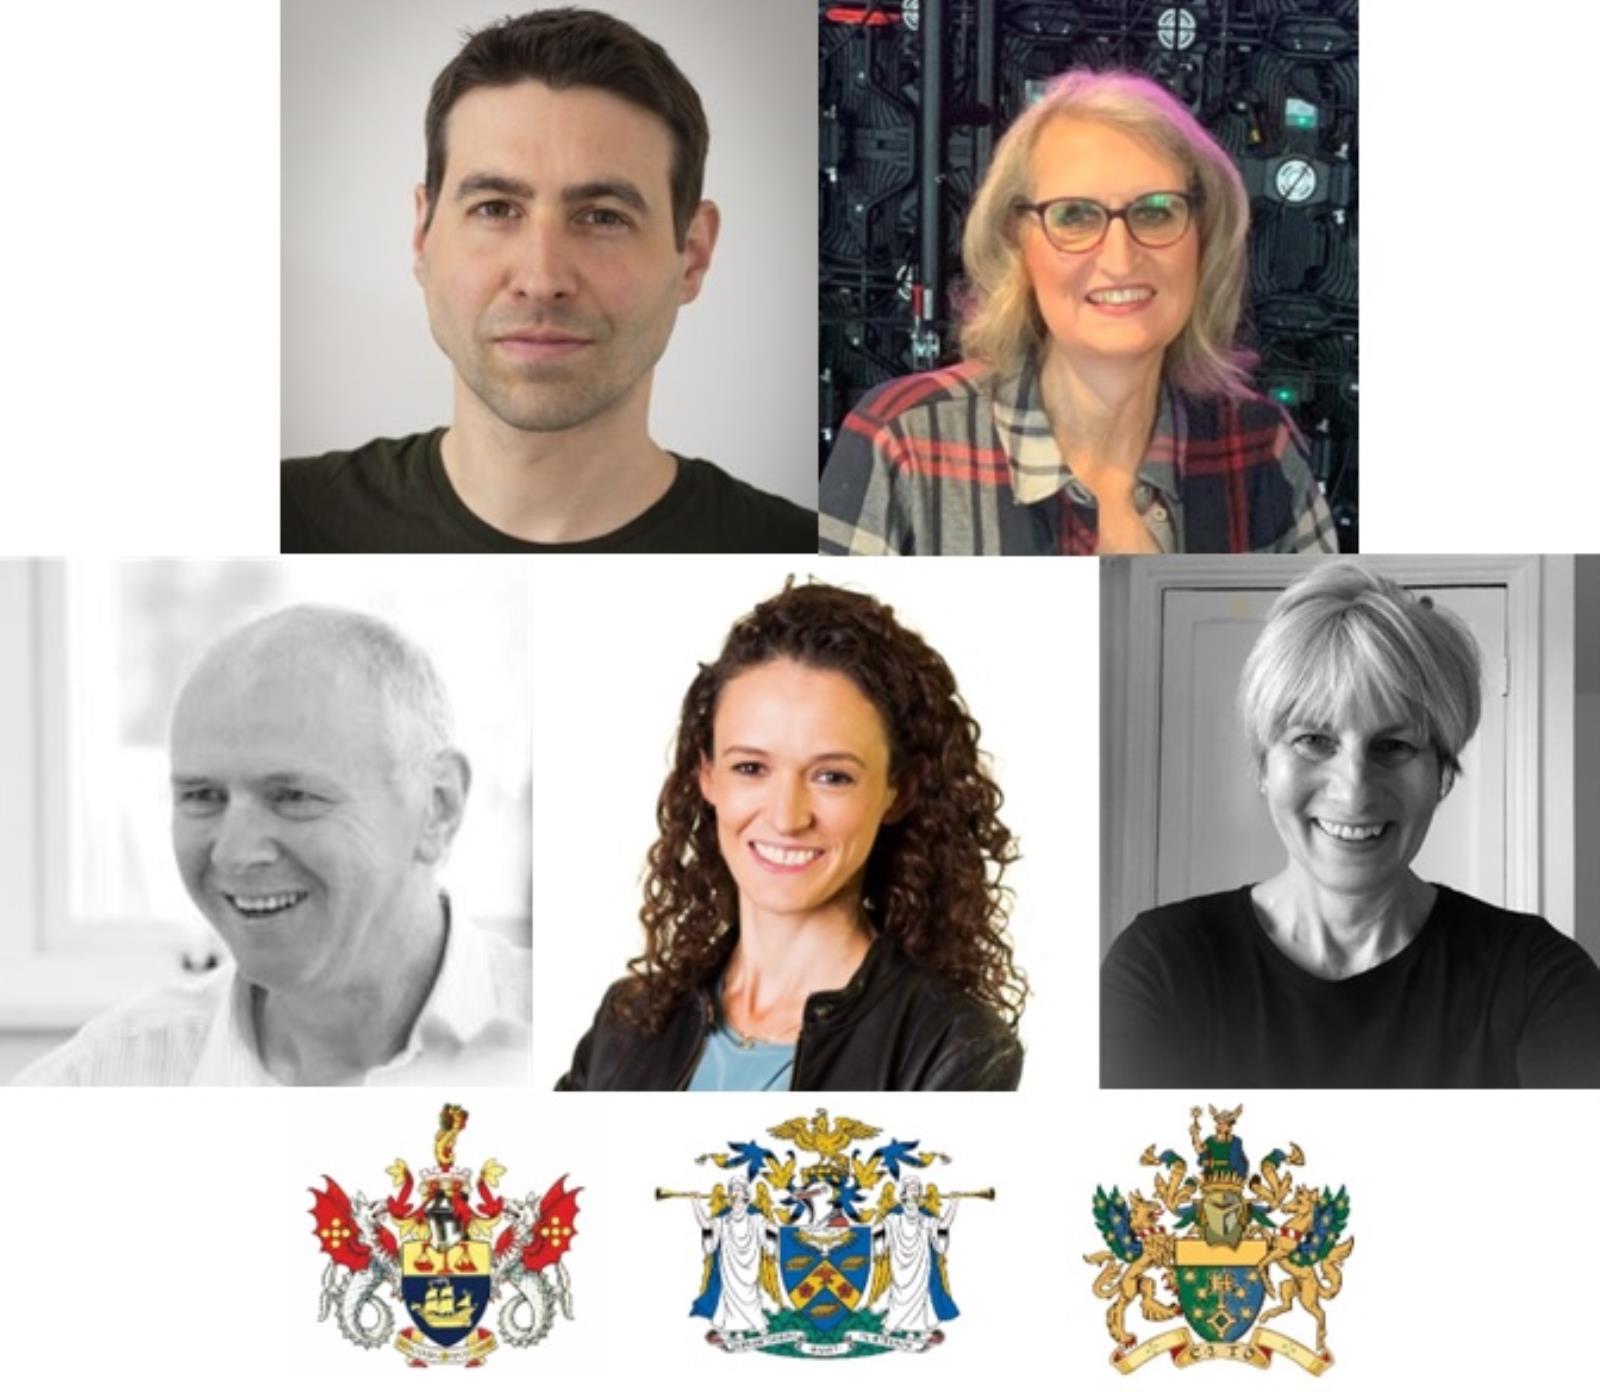 DMG Roundtable 2023: Tri Livery 'How the virtual world is shaping the real world' -24 Jan